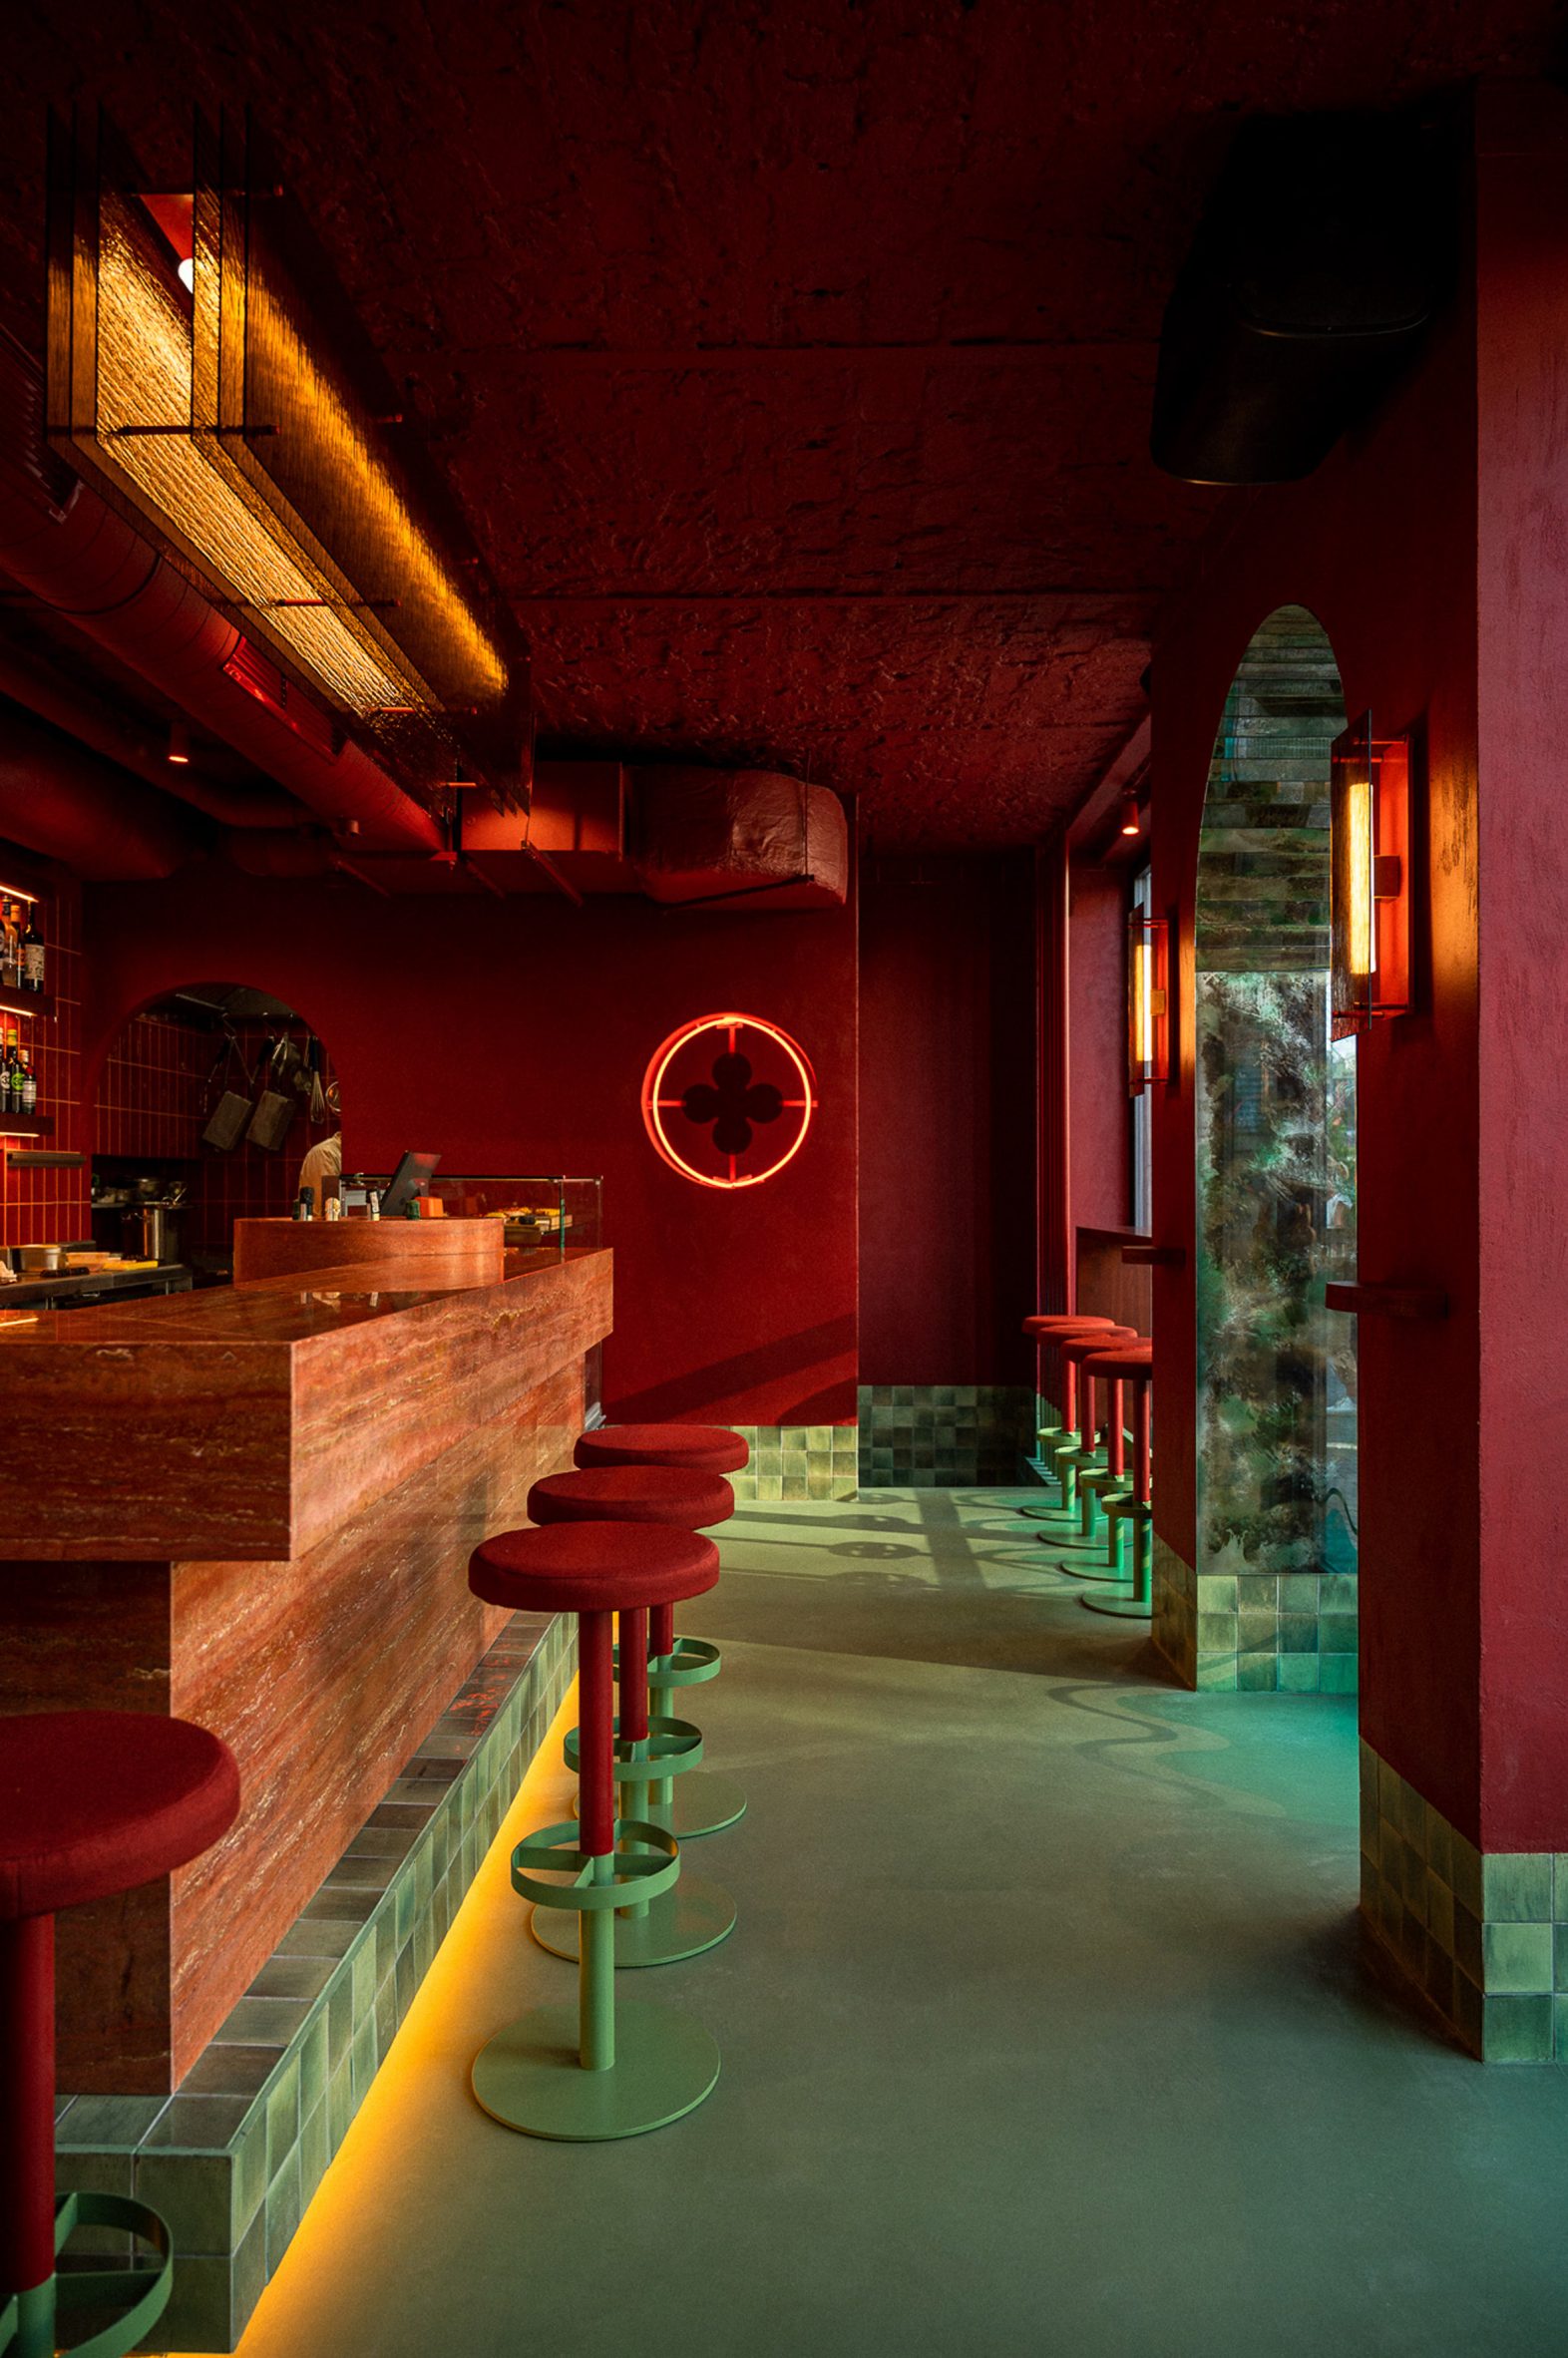 Va Bene Cicchetti bar in Warsaw by Noke Architects with all-red interior and turquoise floors